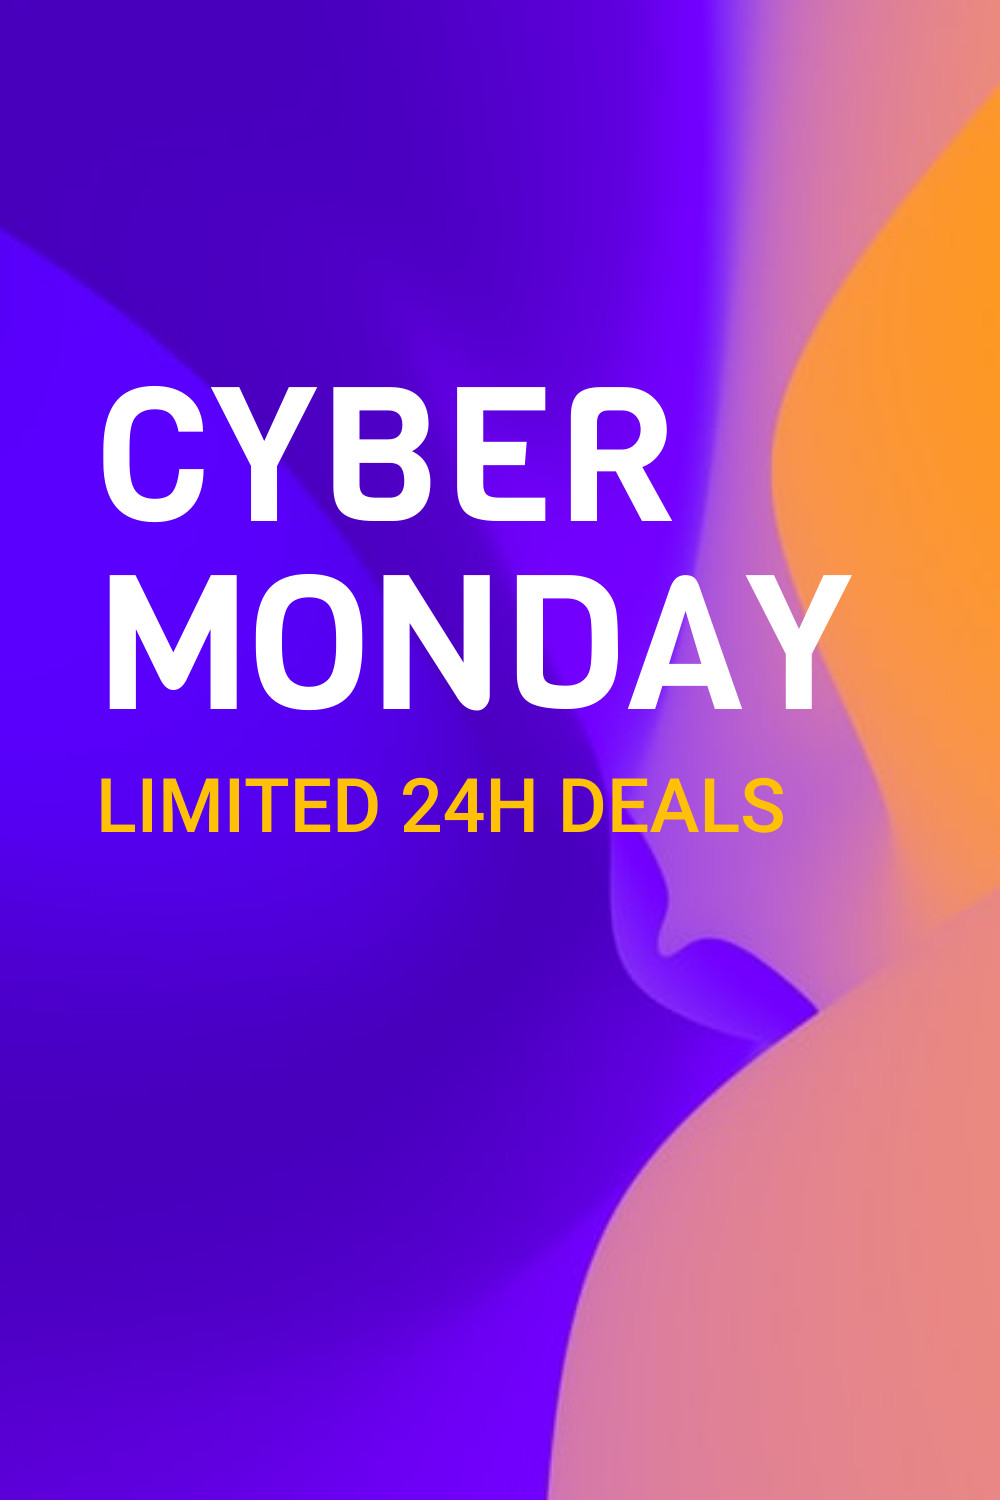 Cyber Monday Limited 24h Deals